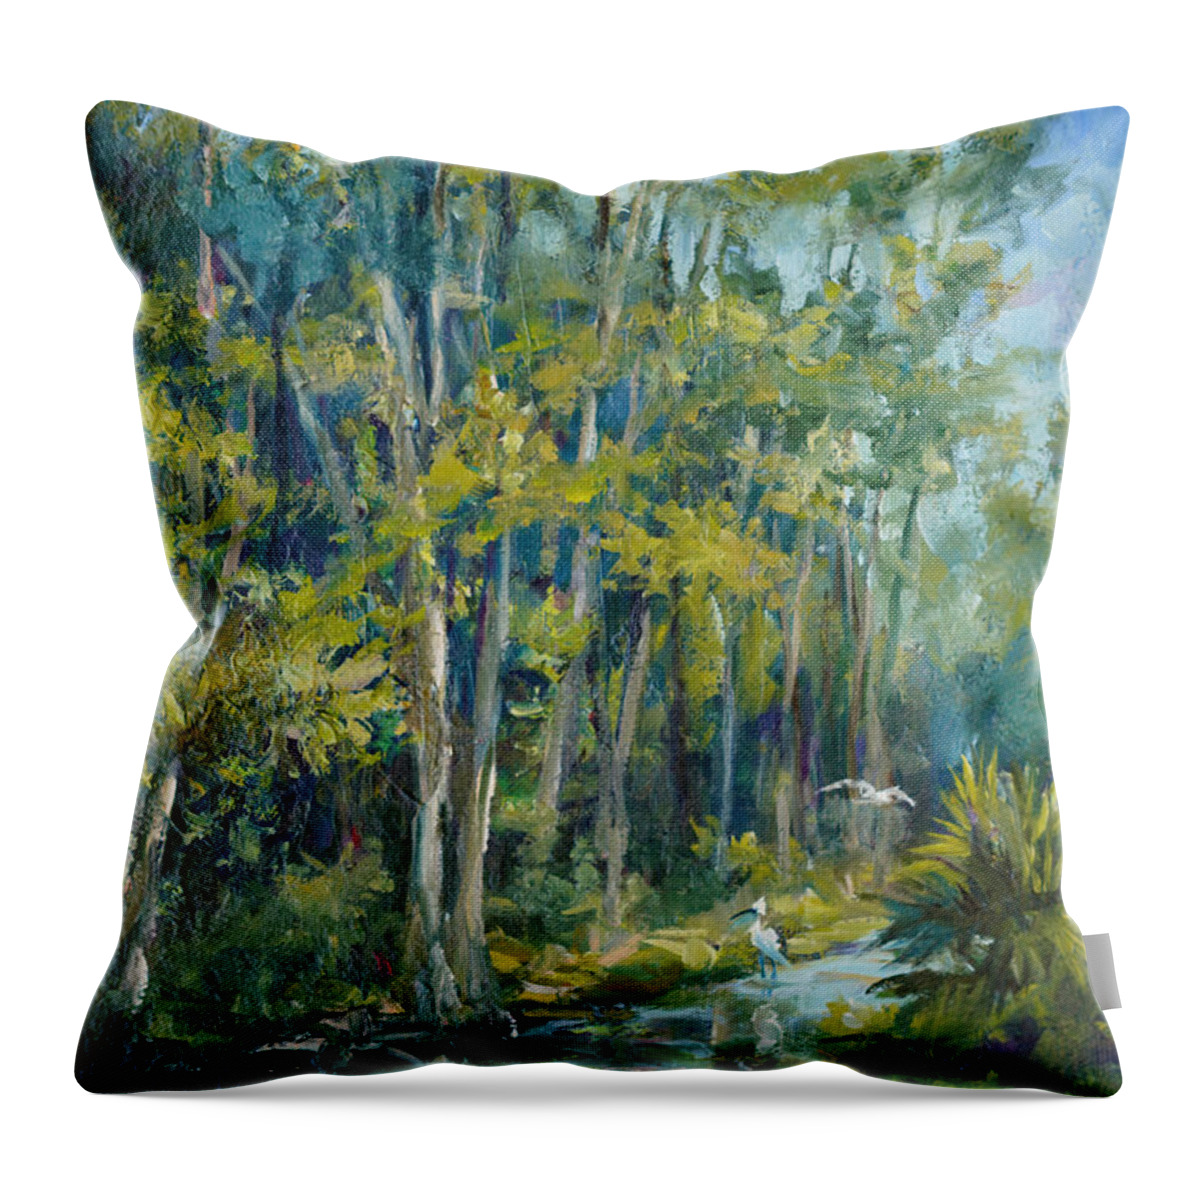 Orlando Wetlands Throw Pillow featuring the painting Orlando Wetlands by Laurie Snow Hein